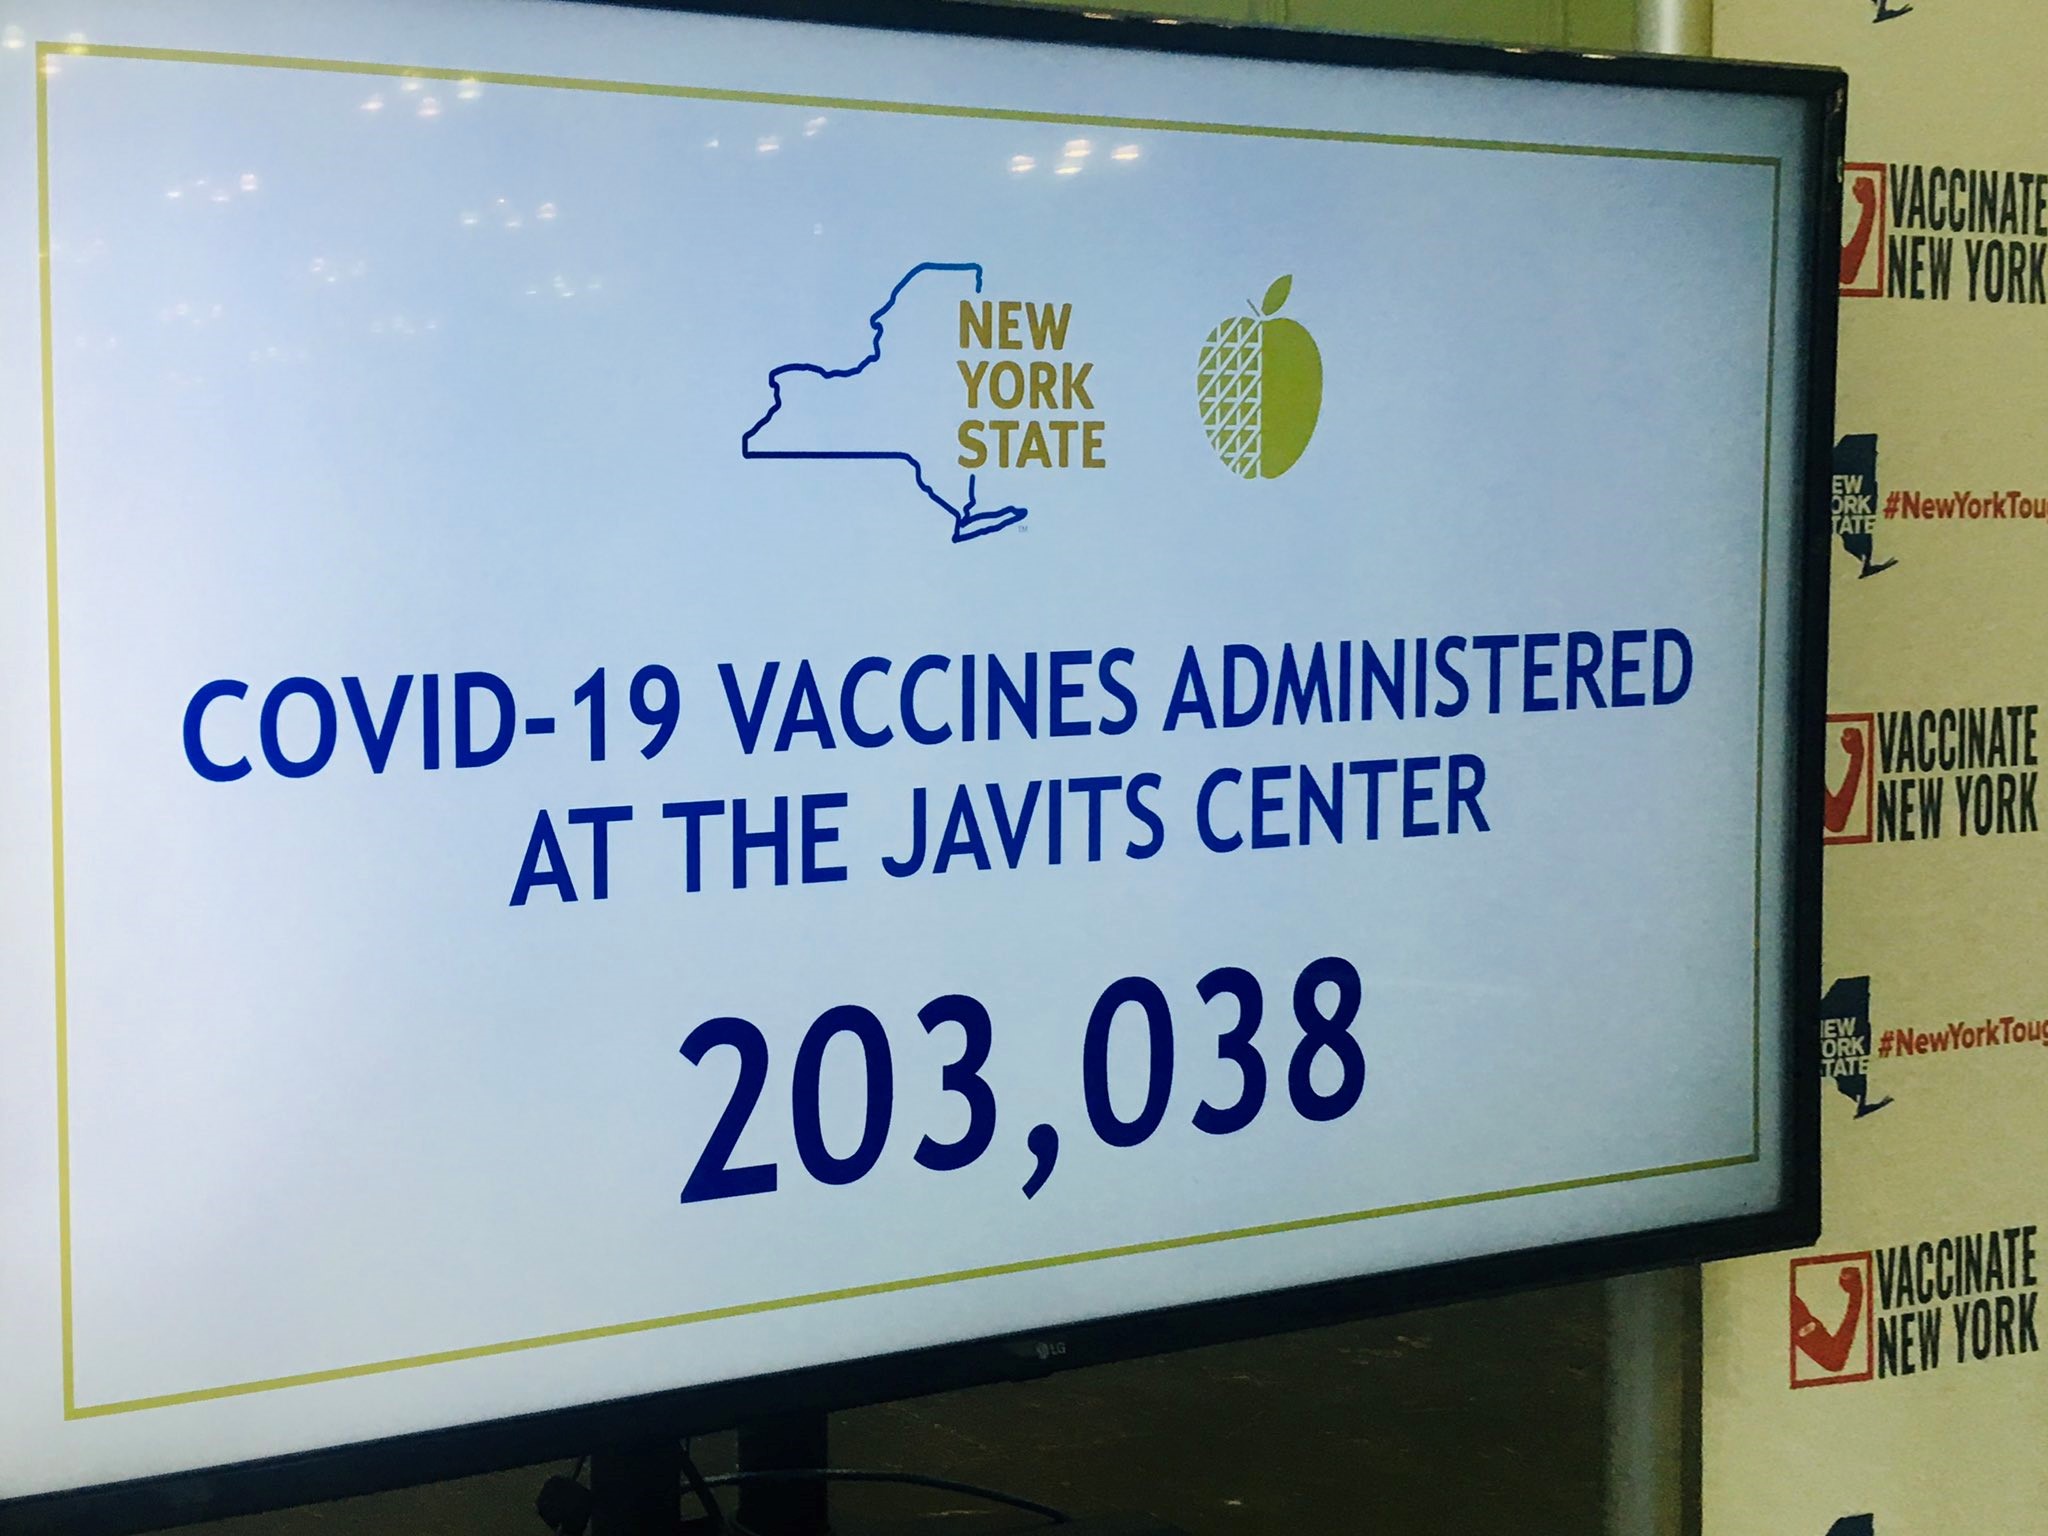 sign at javits center showing number of vaccines administered